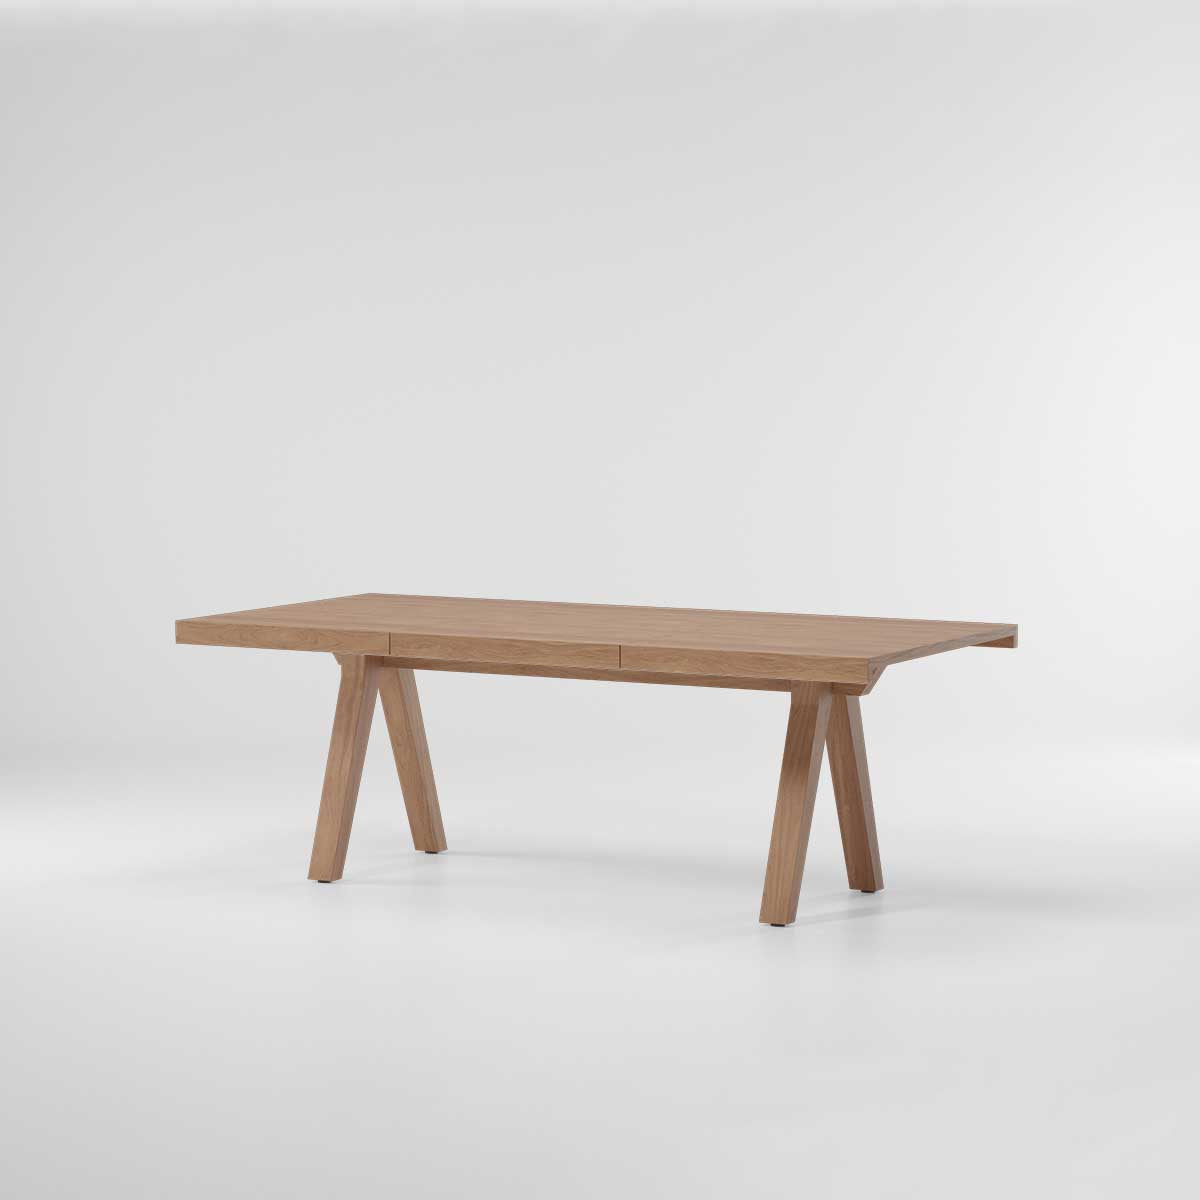 Kettal Vieques Dining Table / 8 Guests Teak Legs